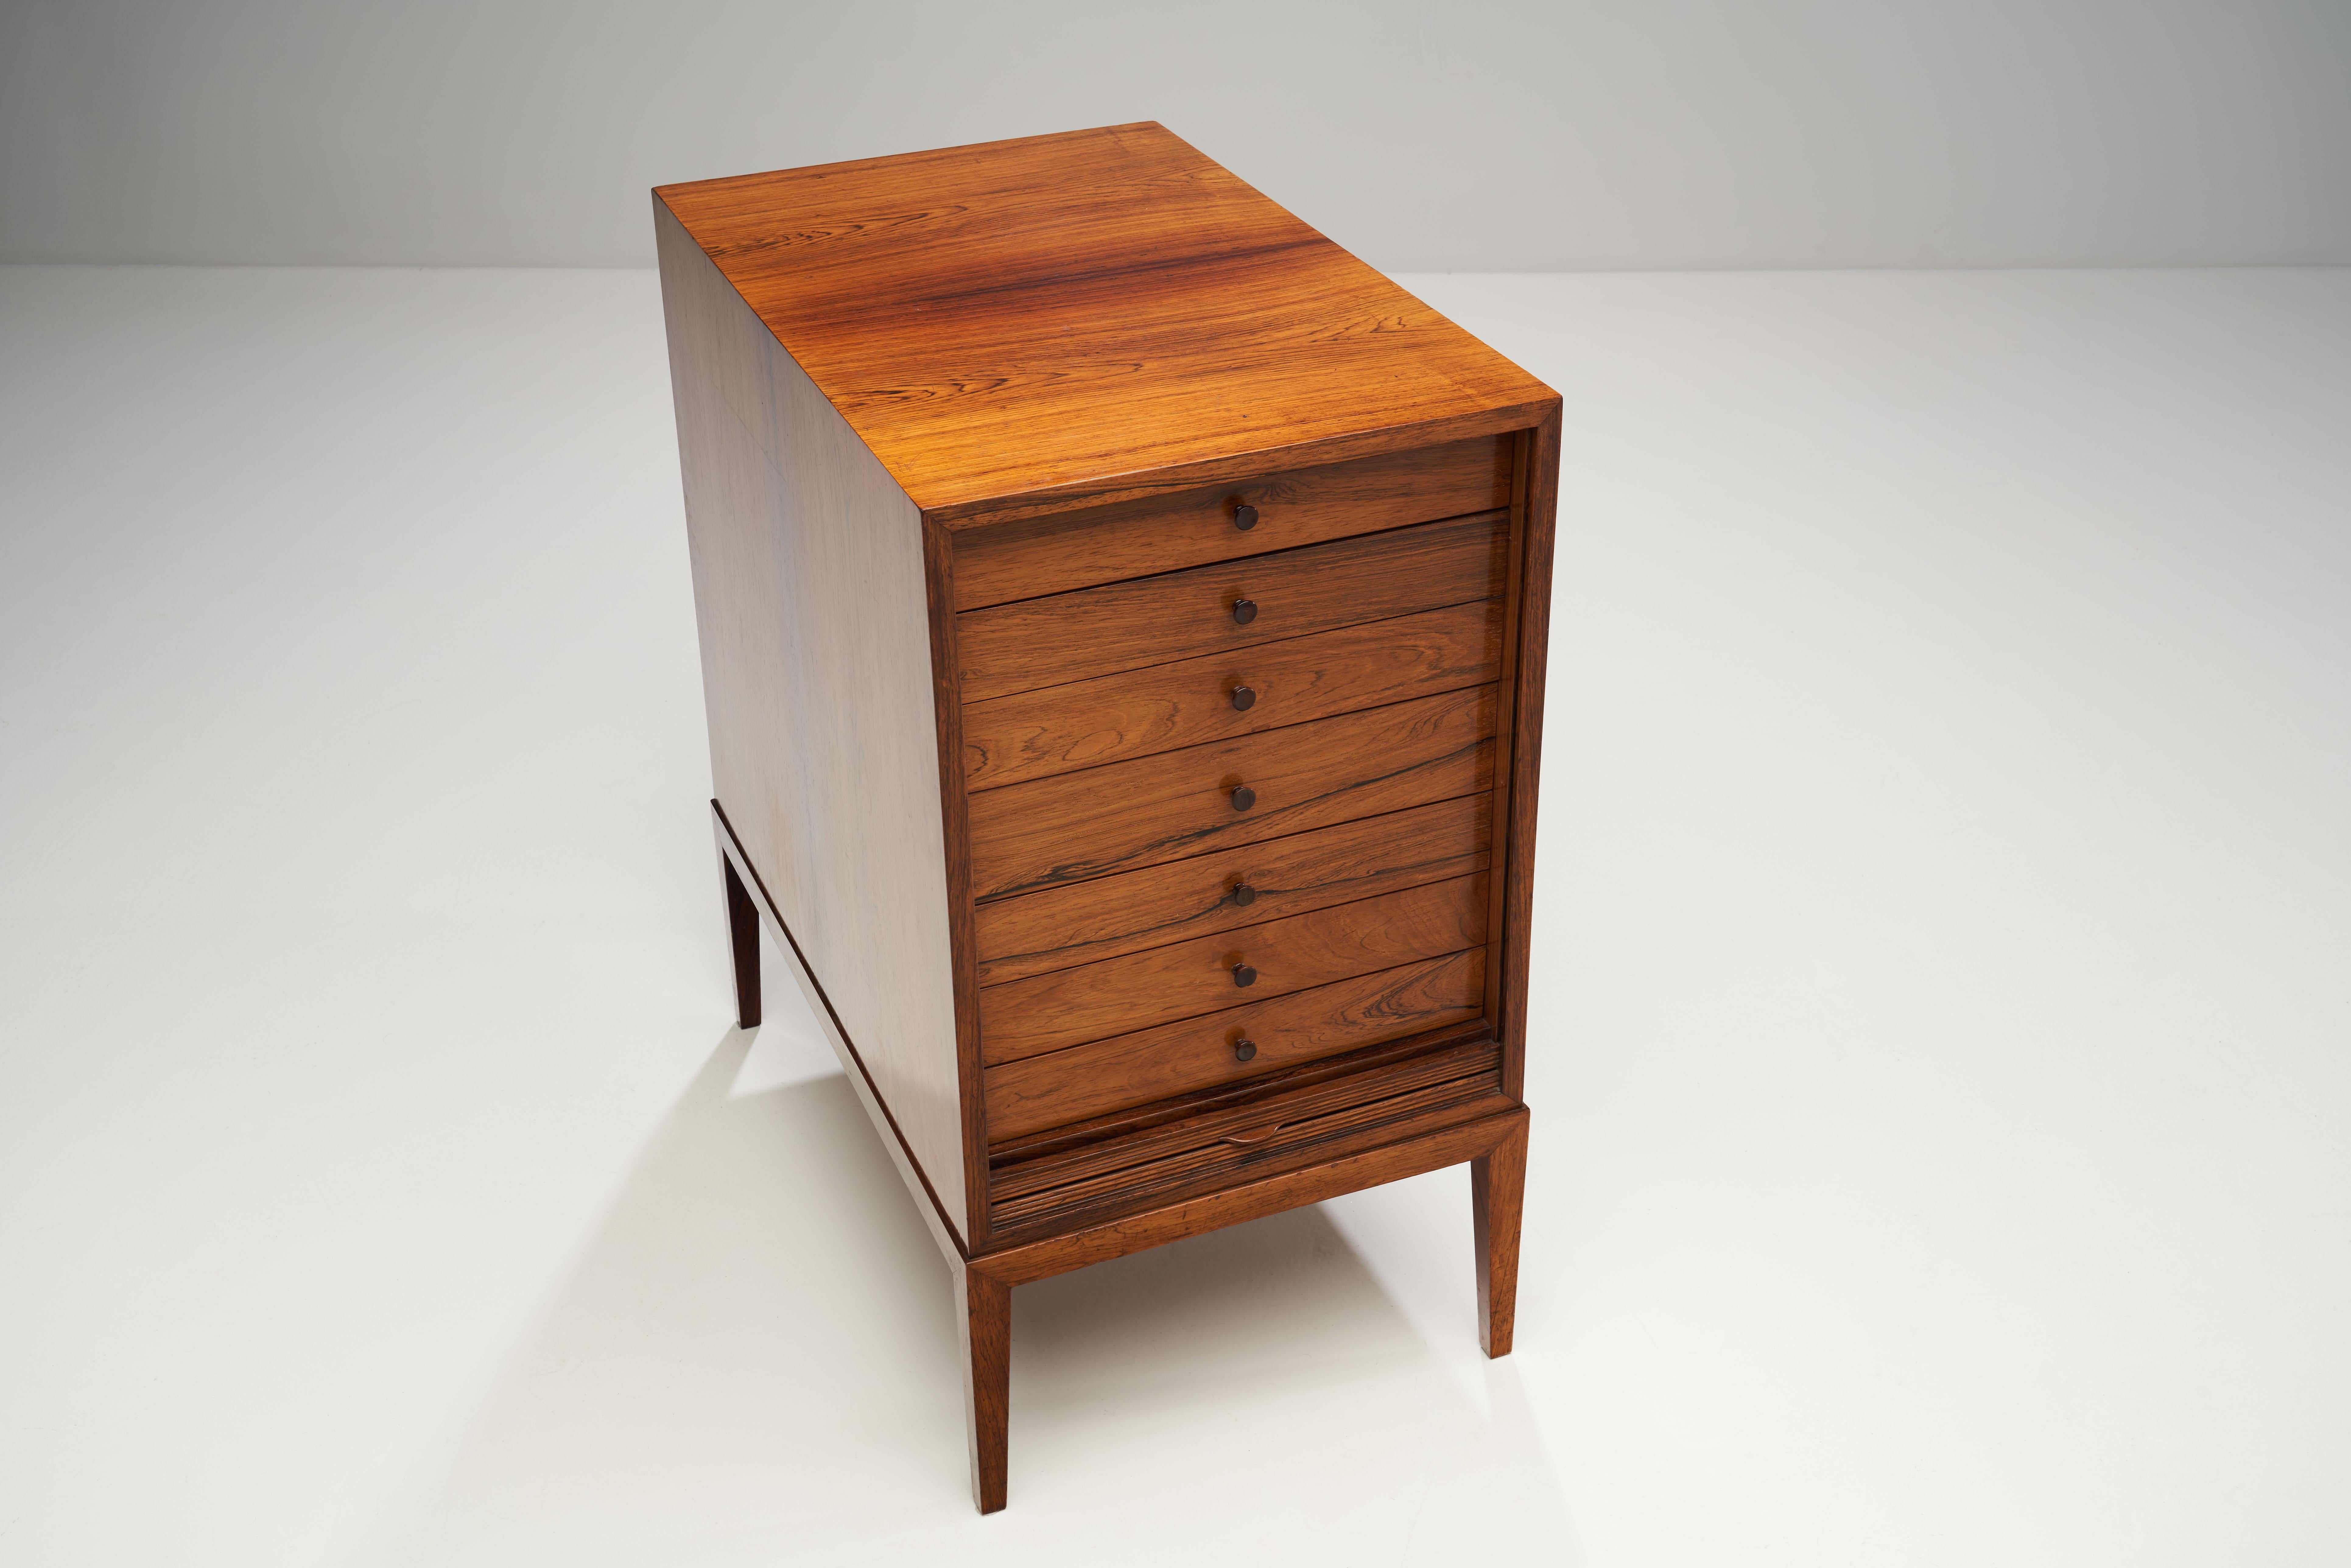 Frits Henningsen Solid Wood Cabinet with Tambour Door, Denmark, 1950s For Sale 3